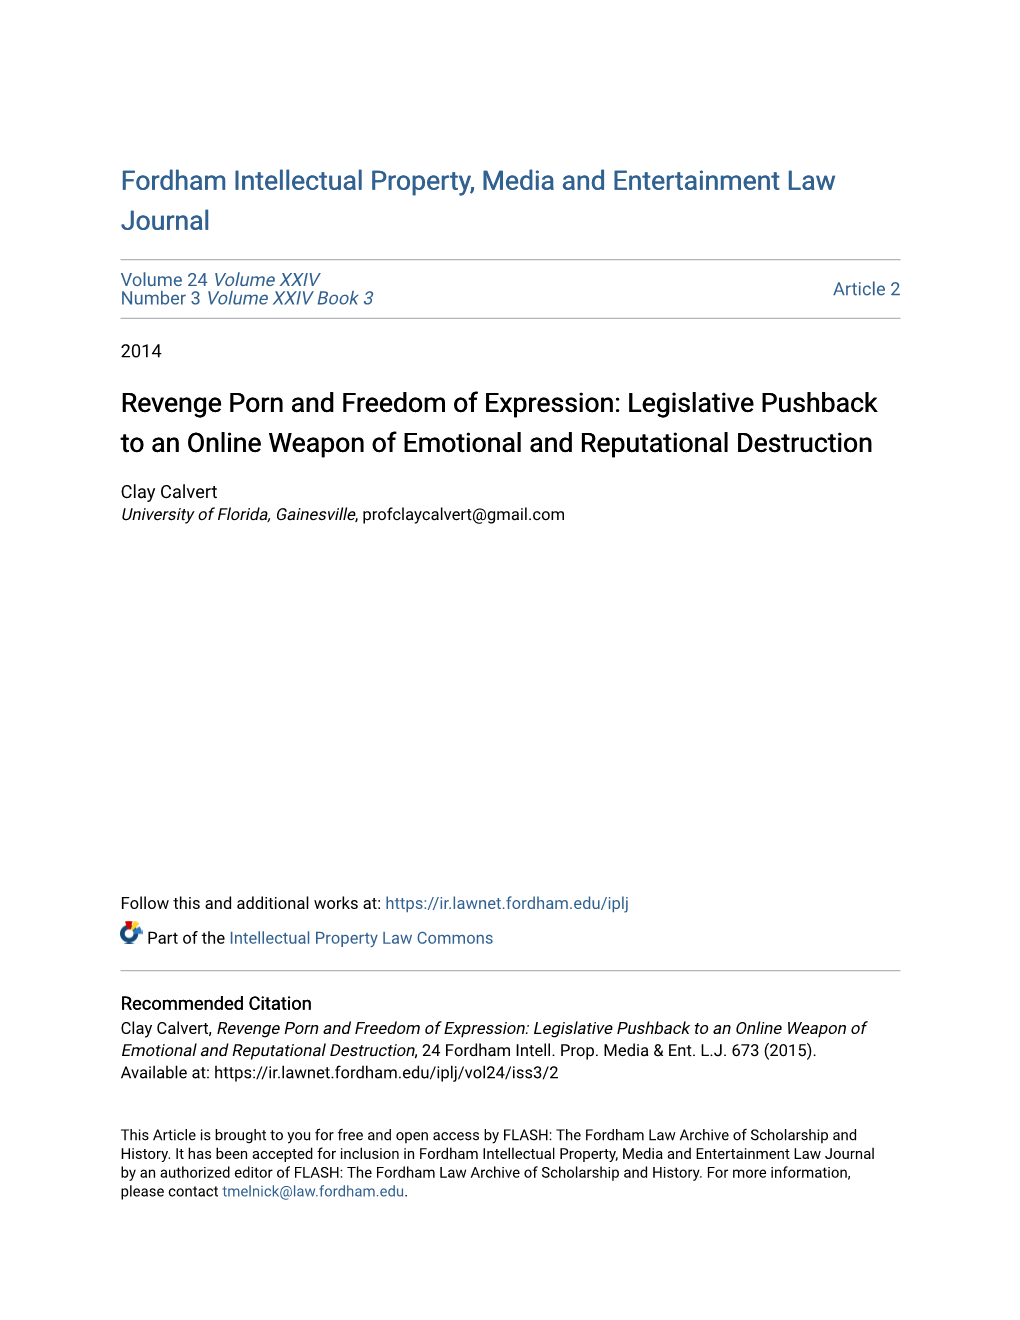 Revenge Porn and Freedom of Expression: Legislative Pushback to an Online Weapon of Emotional and Reputational Destruction